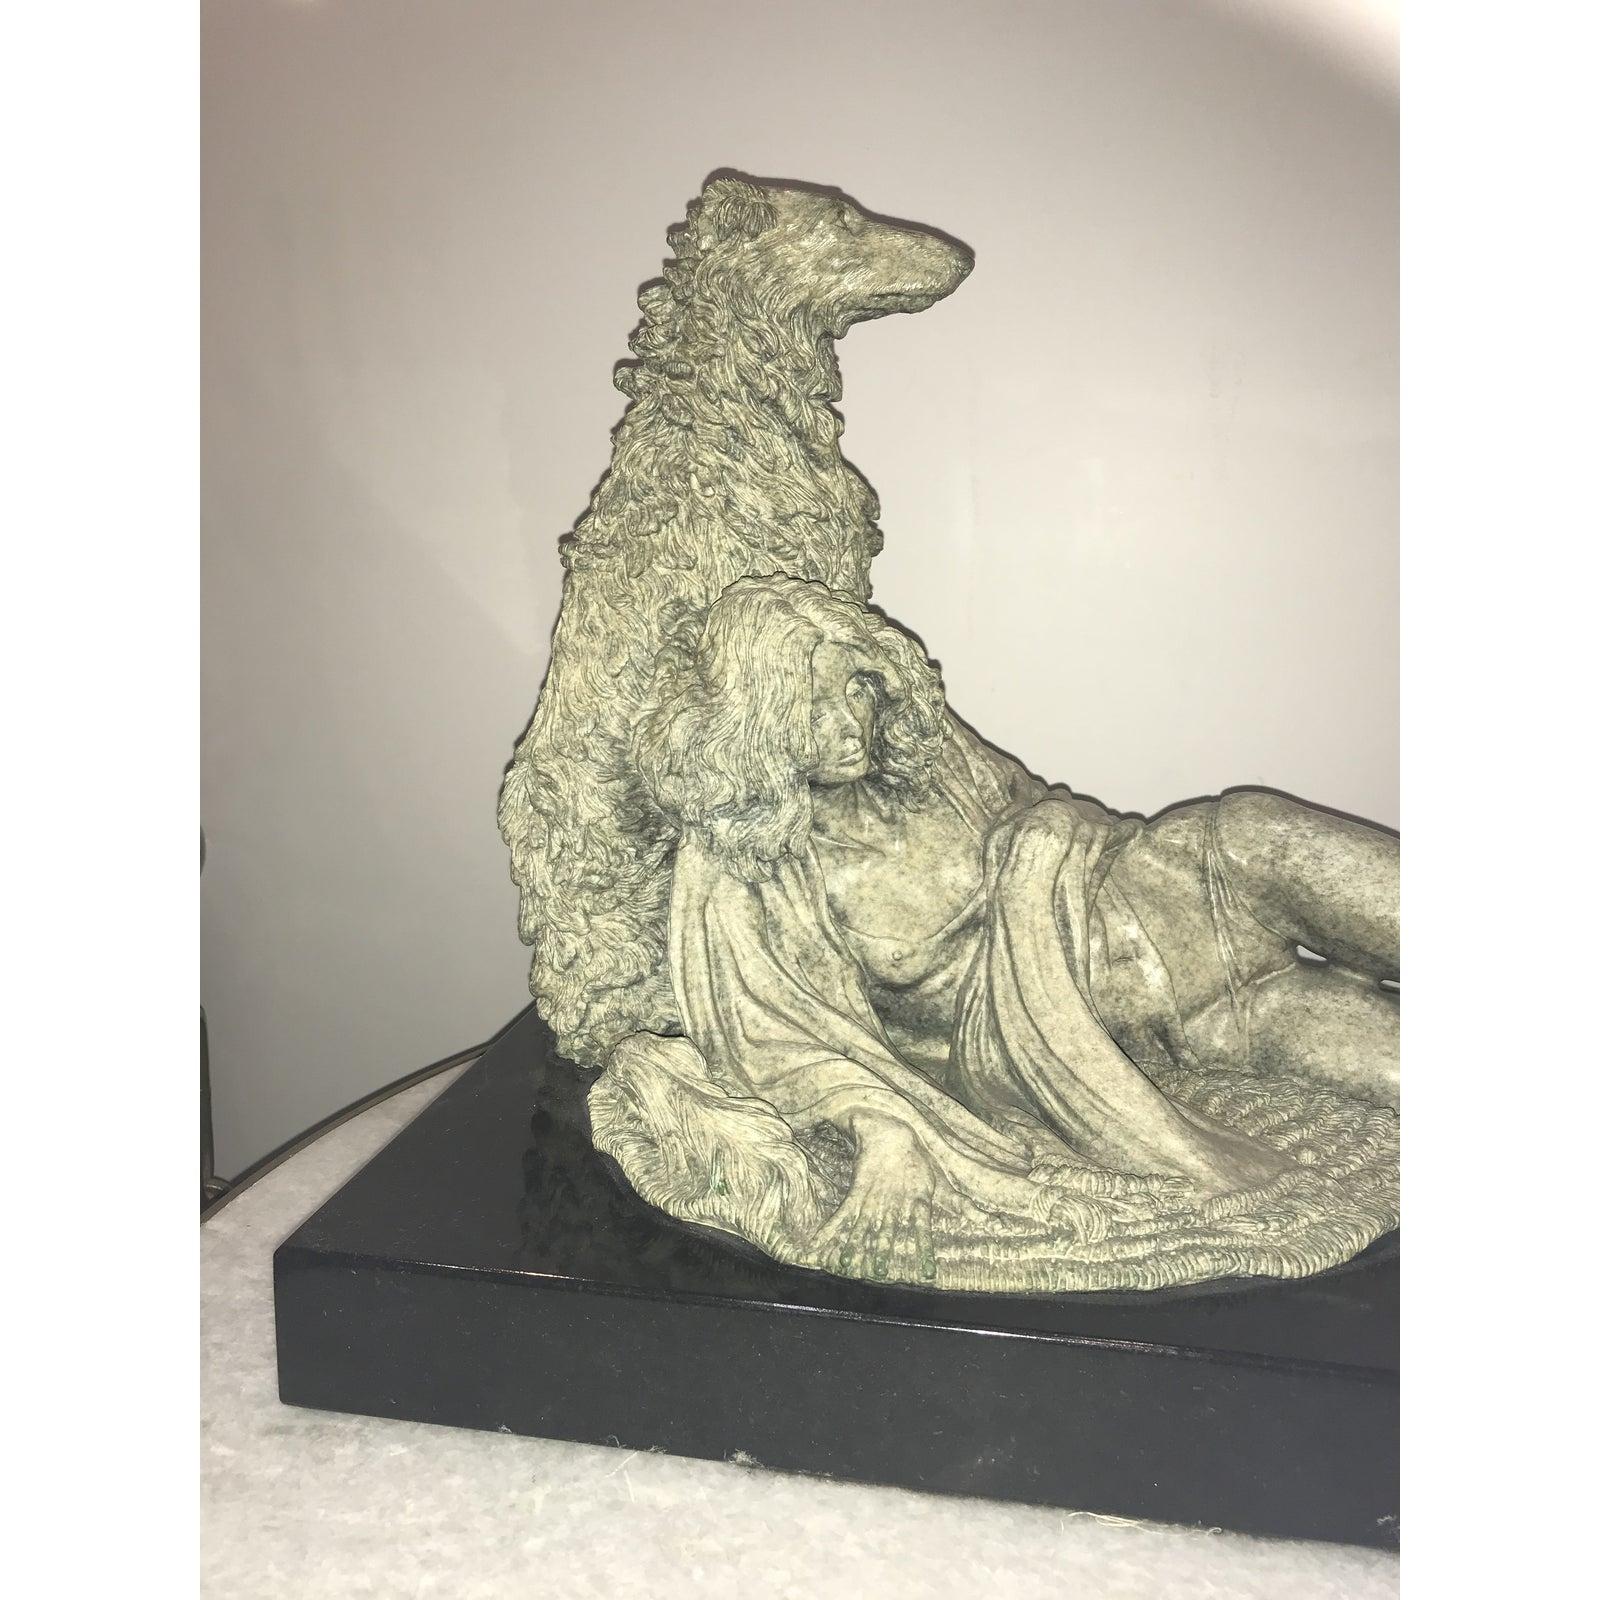  Bronze sculpture of lady with the Scottish Deer Hunter dog bronze comes with green patina
Standing on black granite stone the size of the stand
Massey’s extraordinary technical proficiency heightens the unusual combination of imagery in his work.